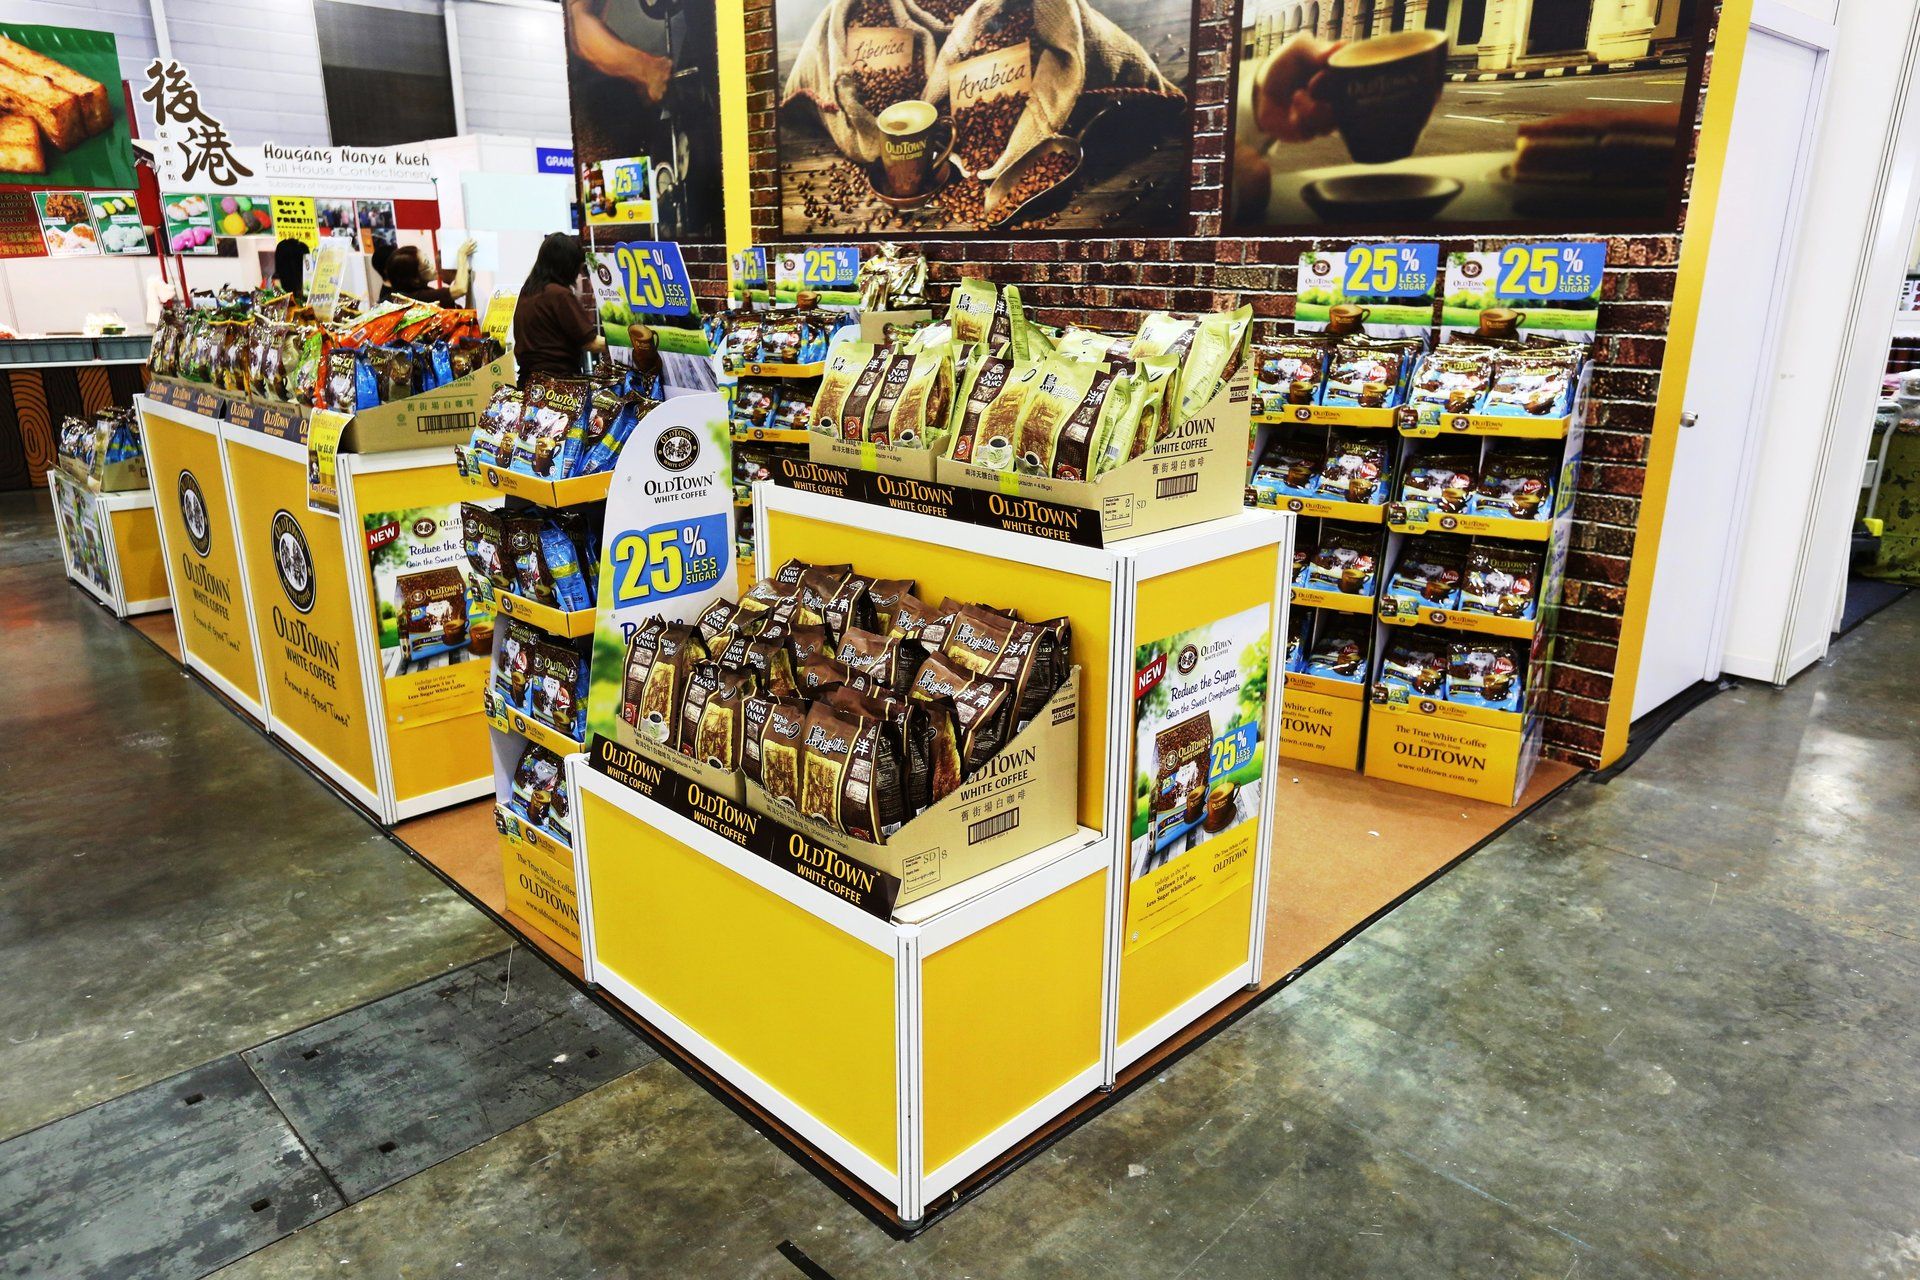 Oldtown Coffee @ Food and Beverage Fair 2014. Booth designed and built by Essential Global Fairs.